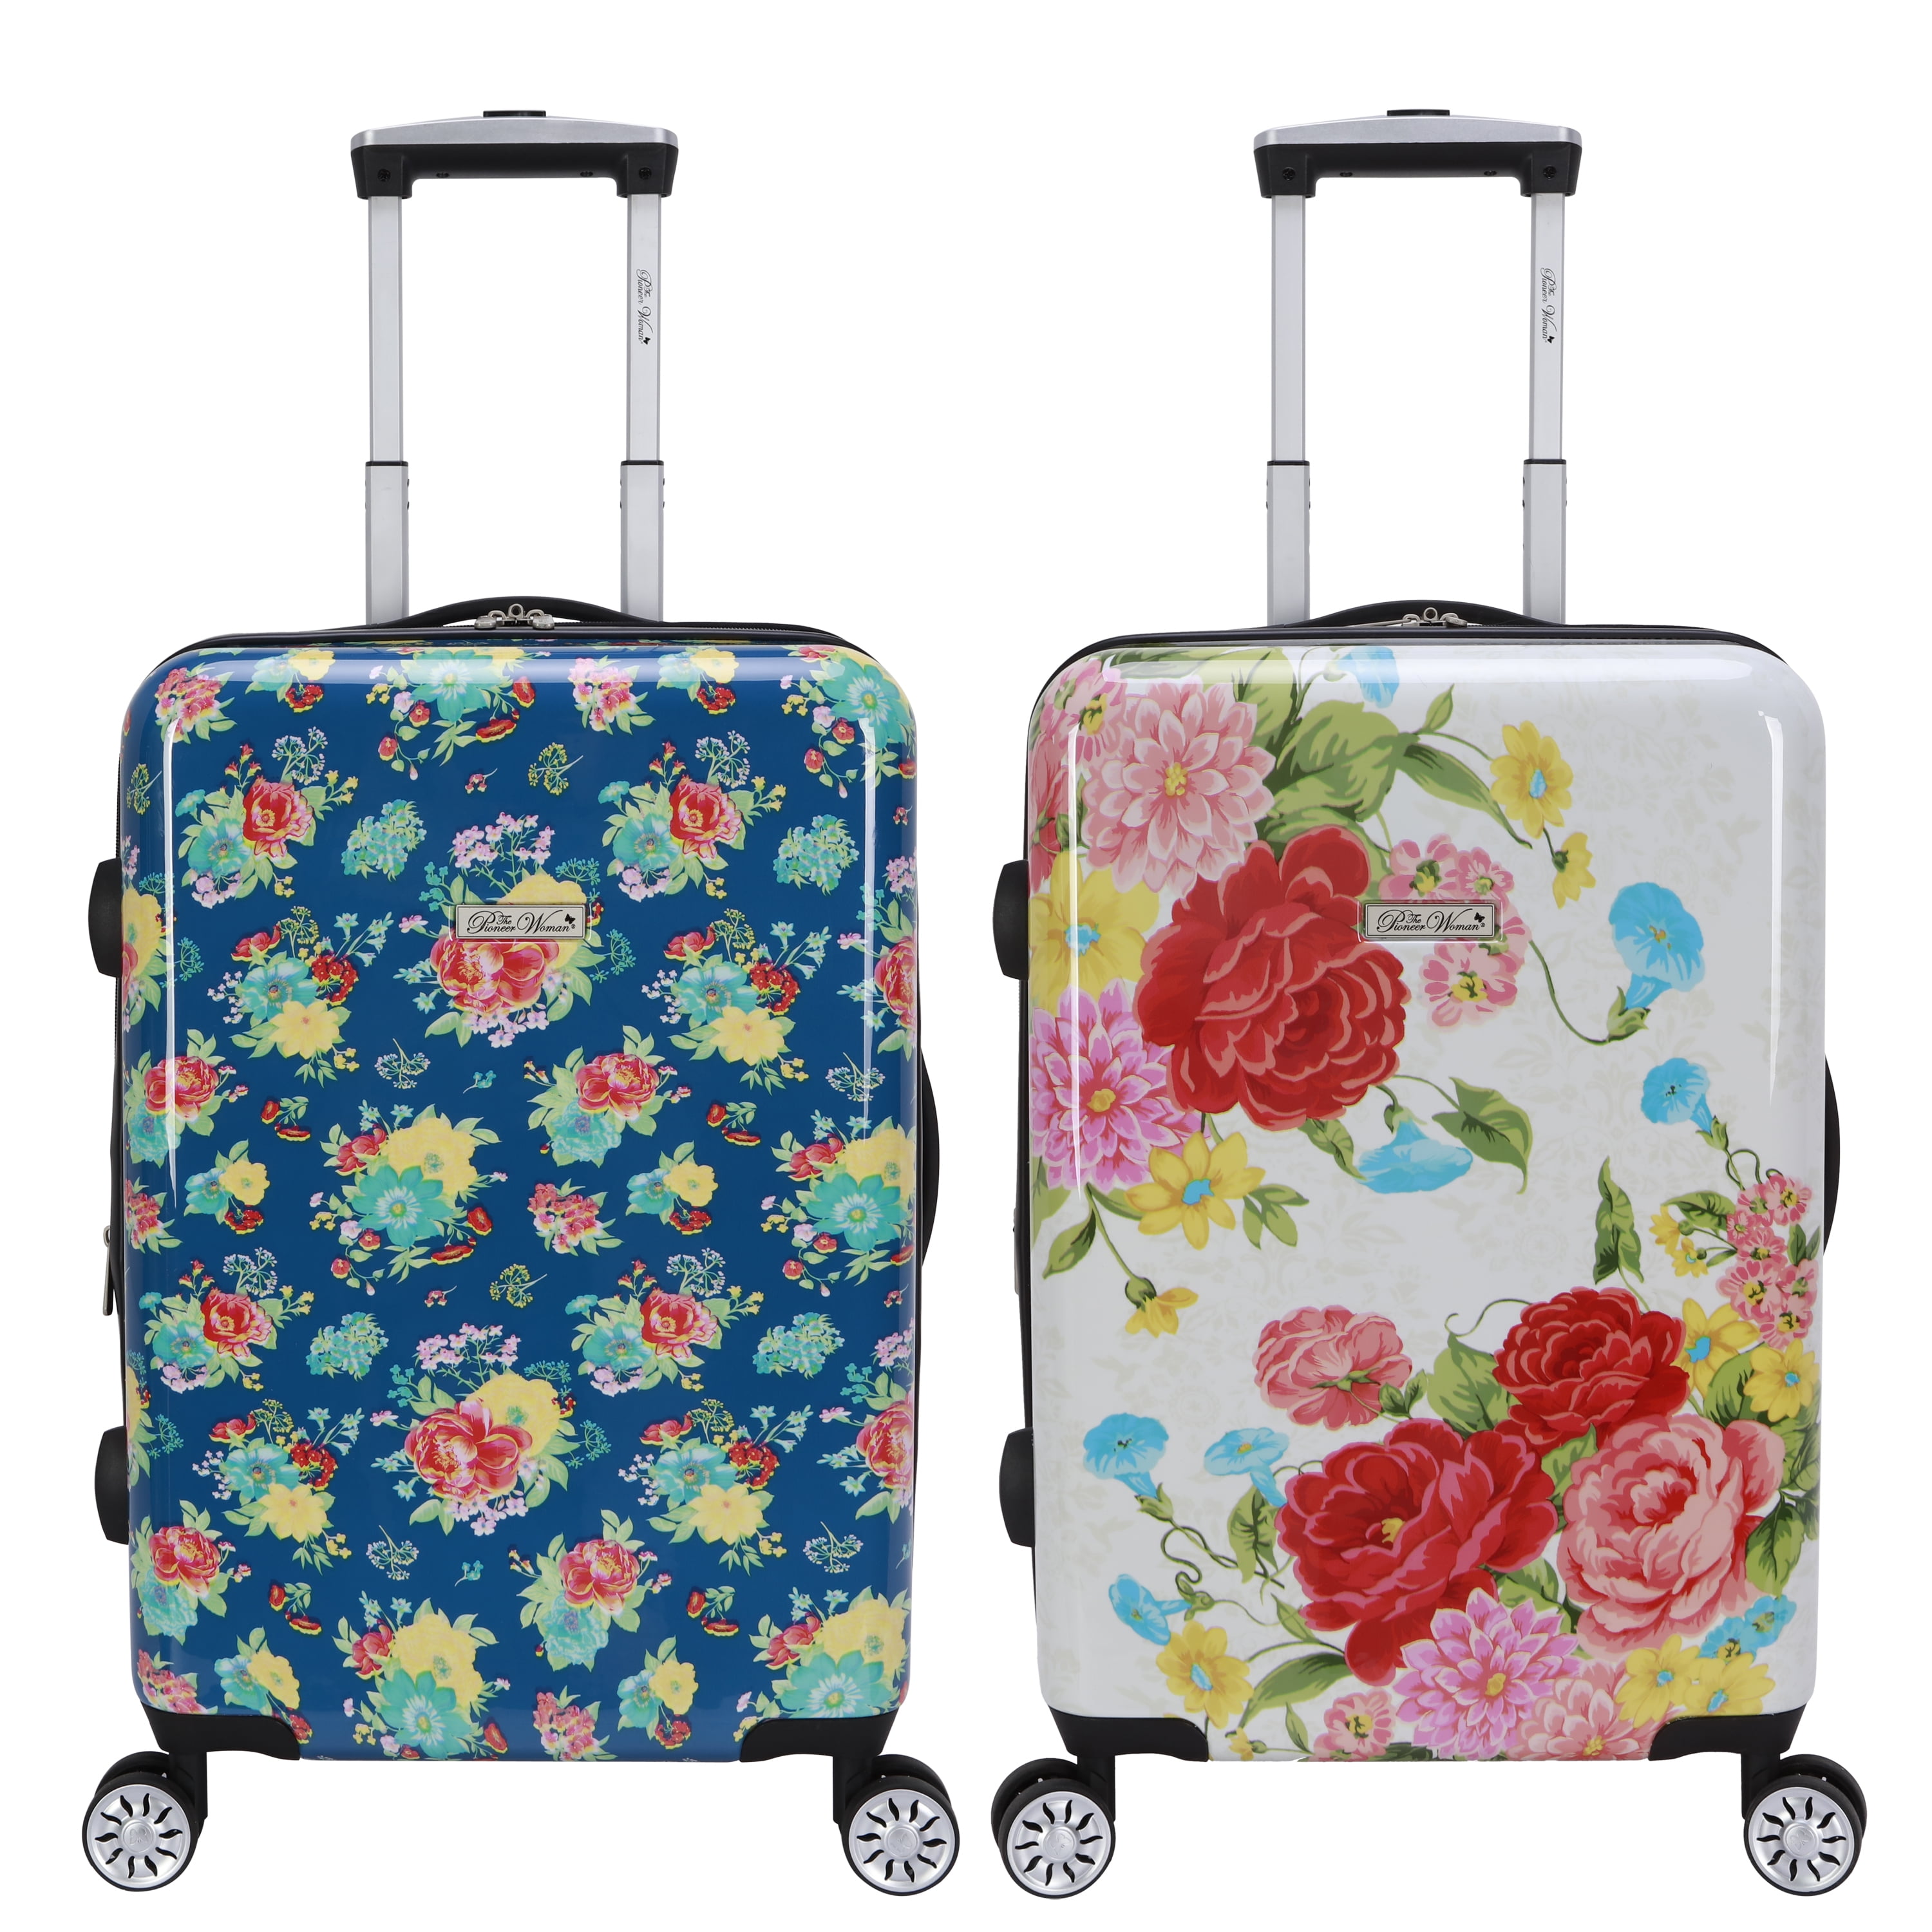 The Pioneer Woman 21” Hardside Carry-On Luggage